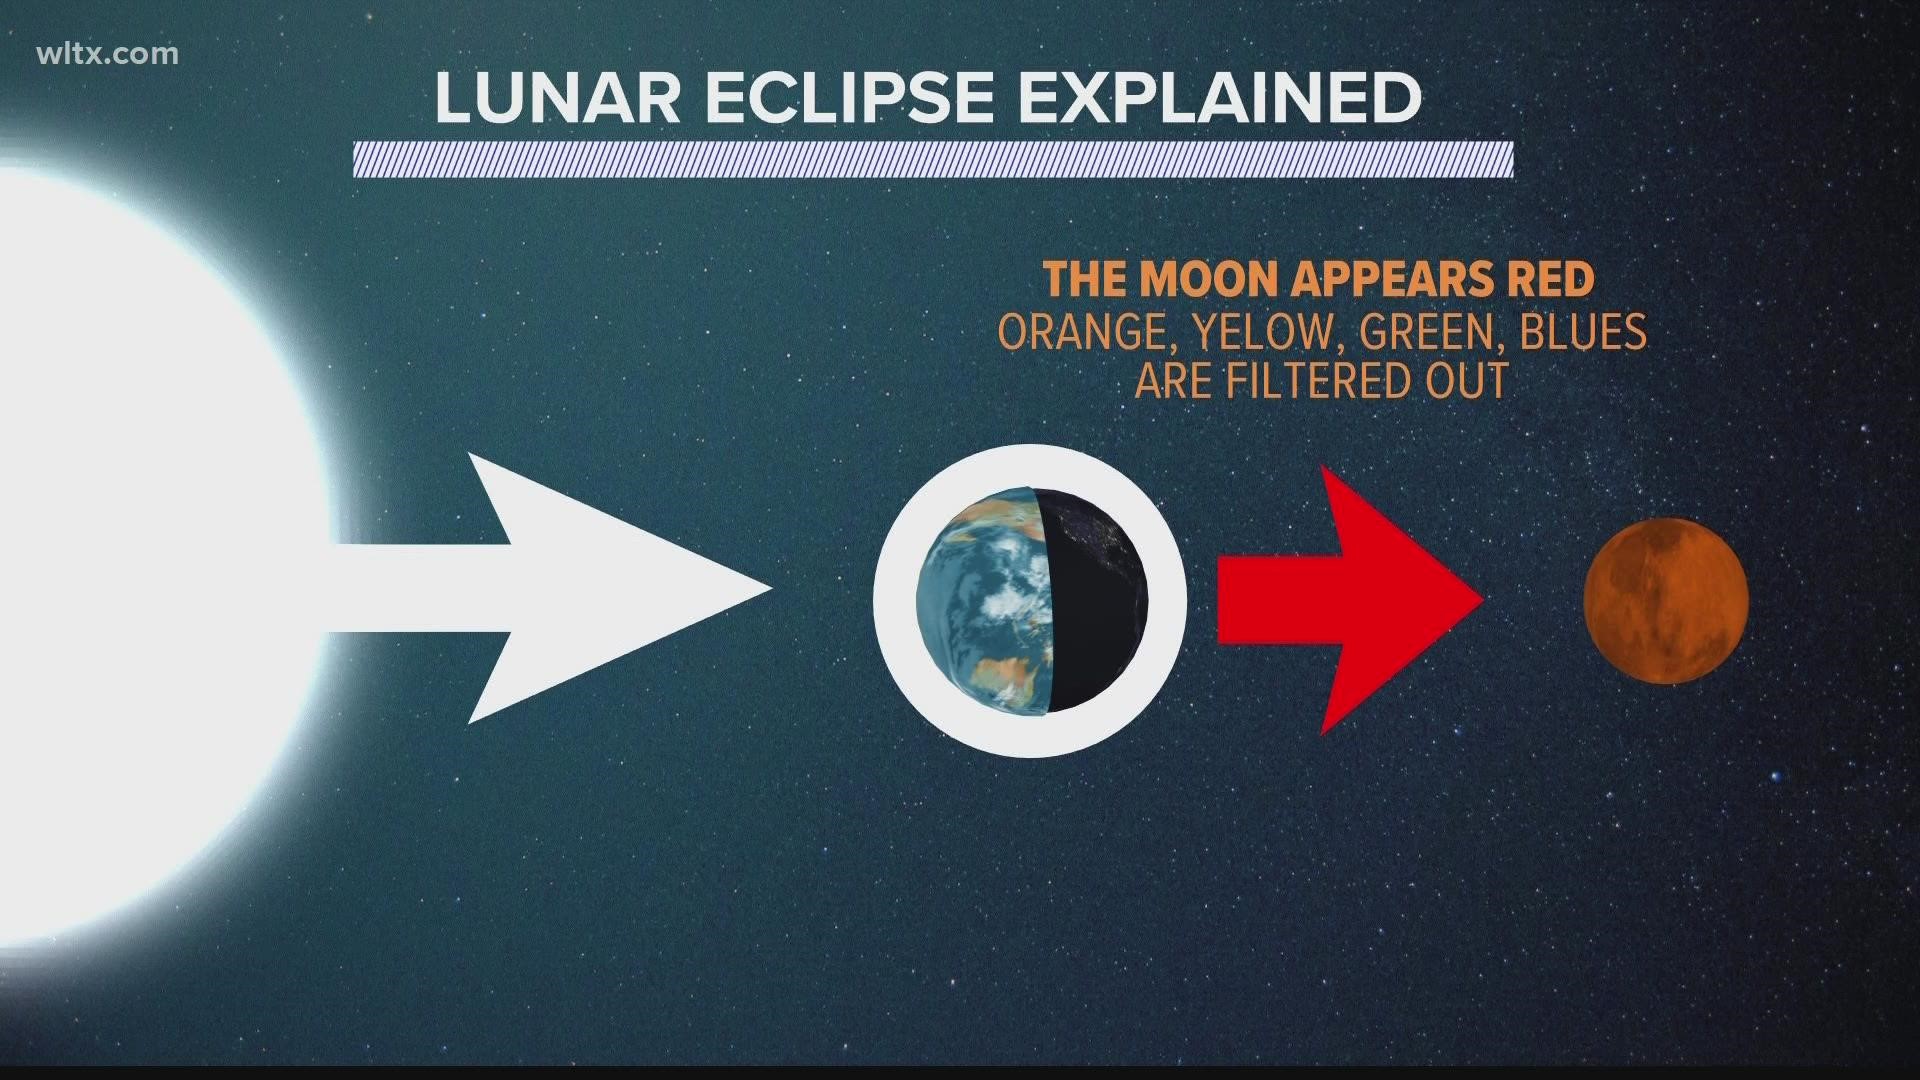 Here are all of the tips for viewing the last visible total lunar eclipse in this part of the country that we will see until 2025.